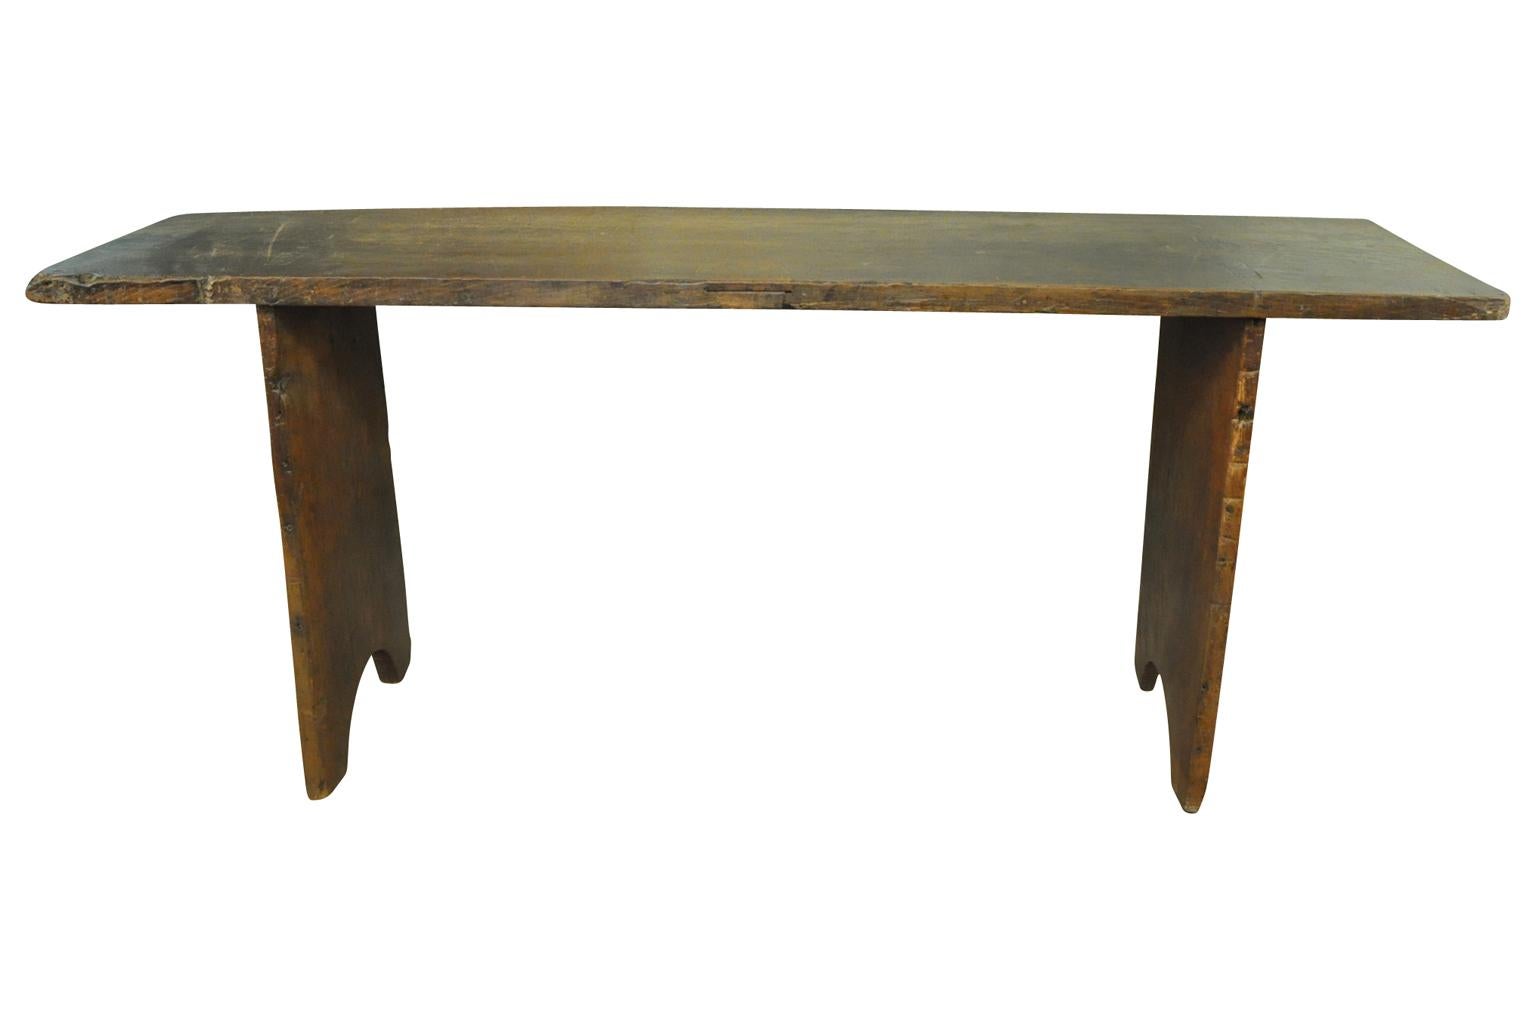 A very handsome and Primitive console table from Northern Spain. Beautifully and soundly constructed from solid boards of chestnut. Sensational patina. Rustically elegant.